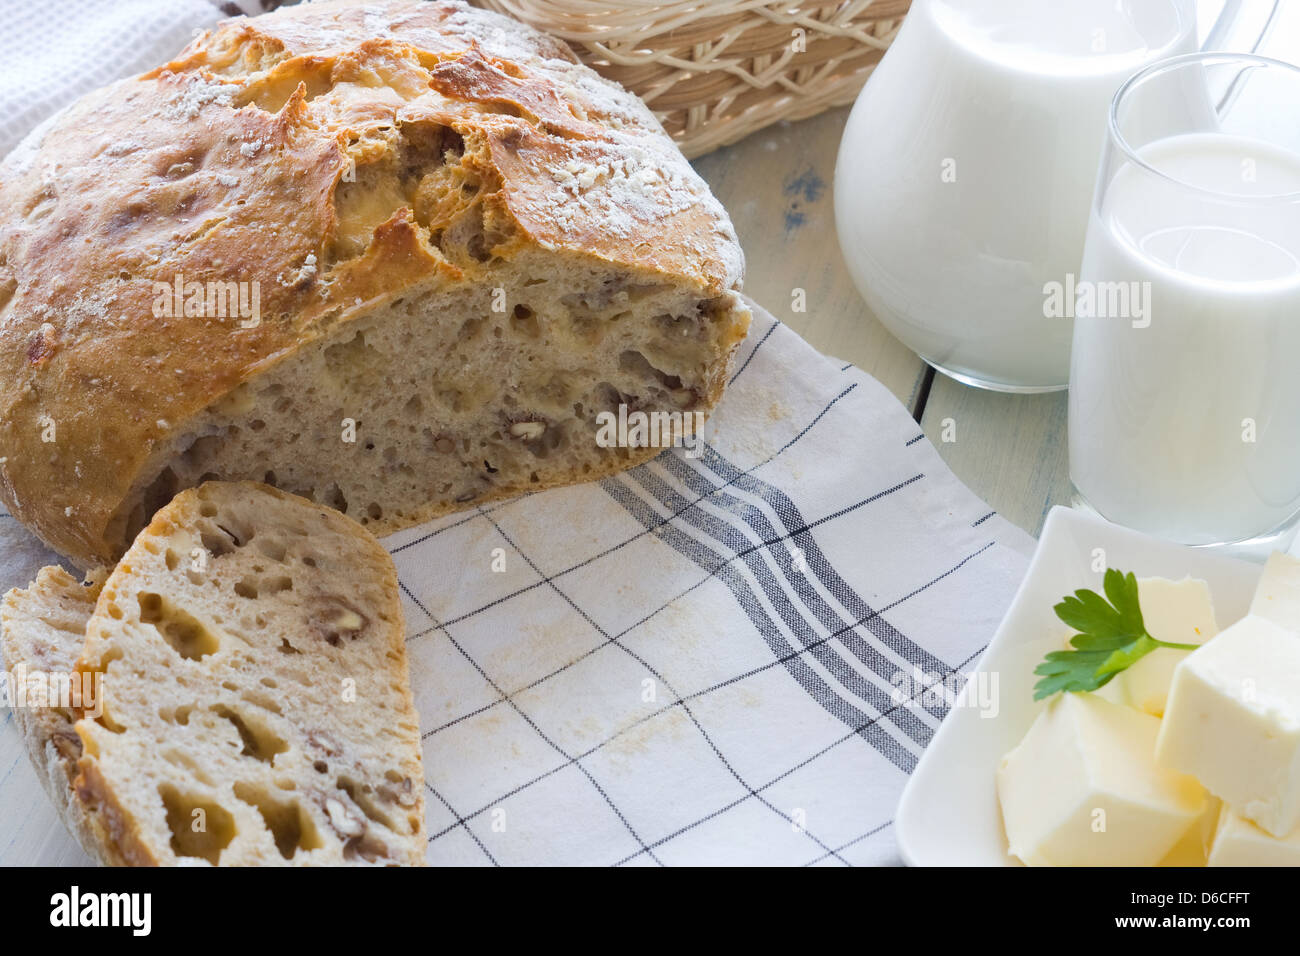 A freshly baked loaf of homemade bread with ripe cheese and walnuts Stock Photo